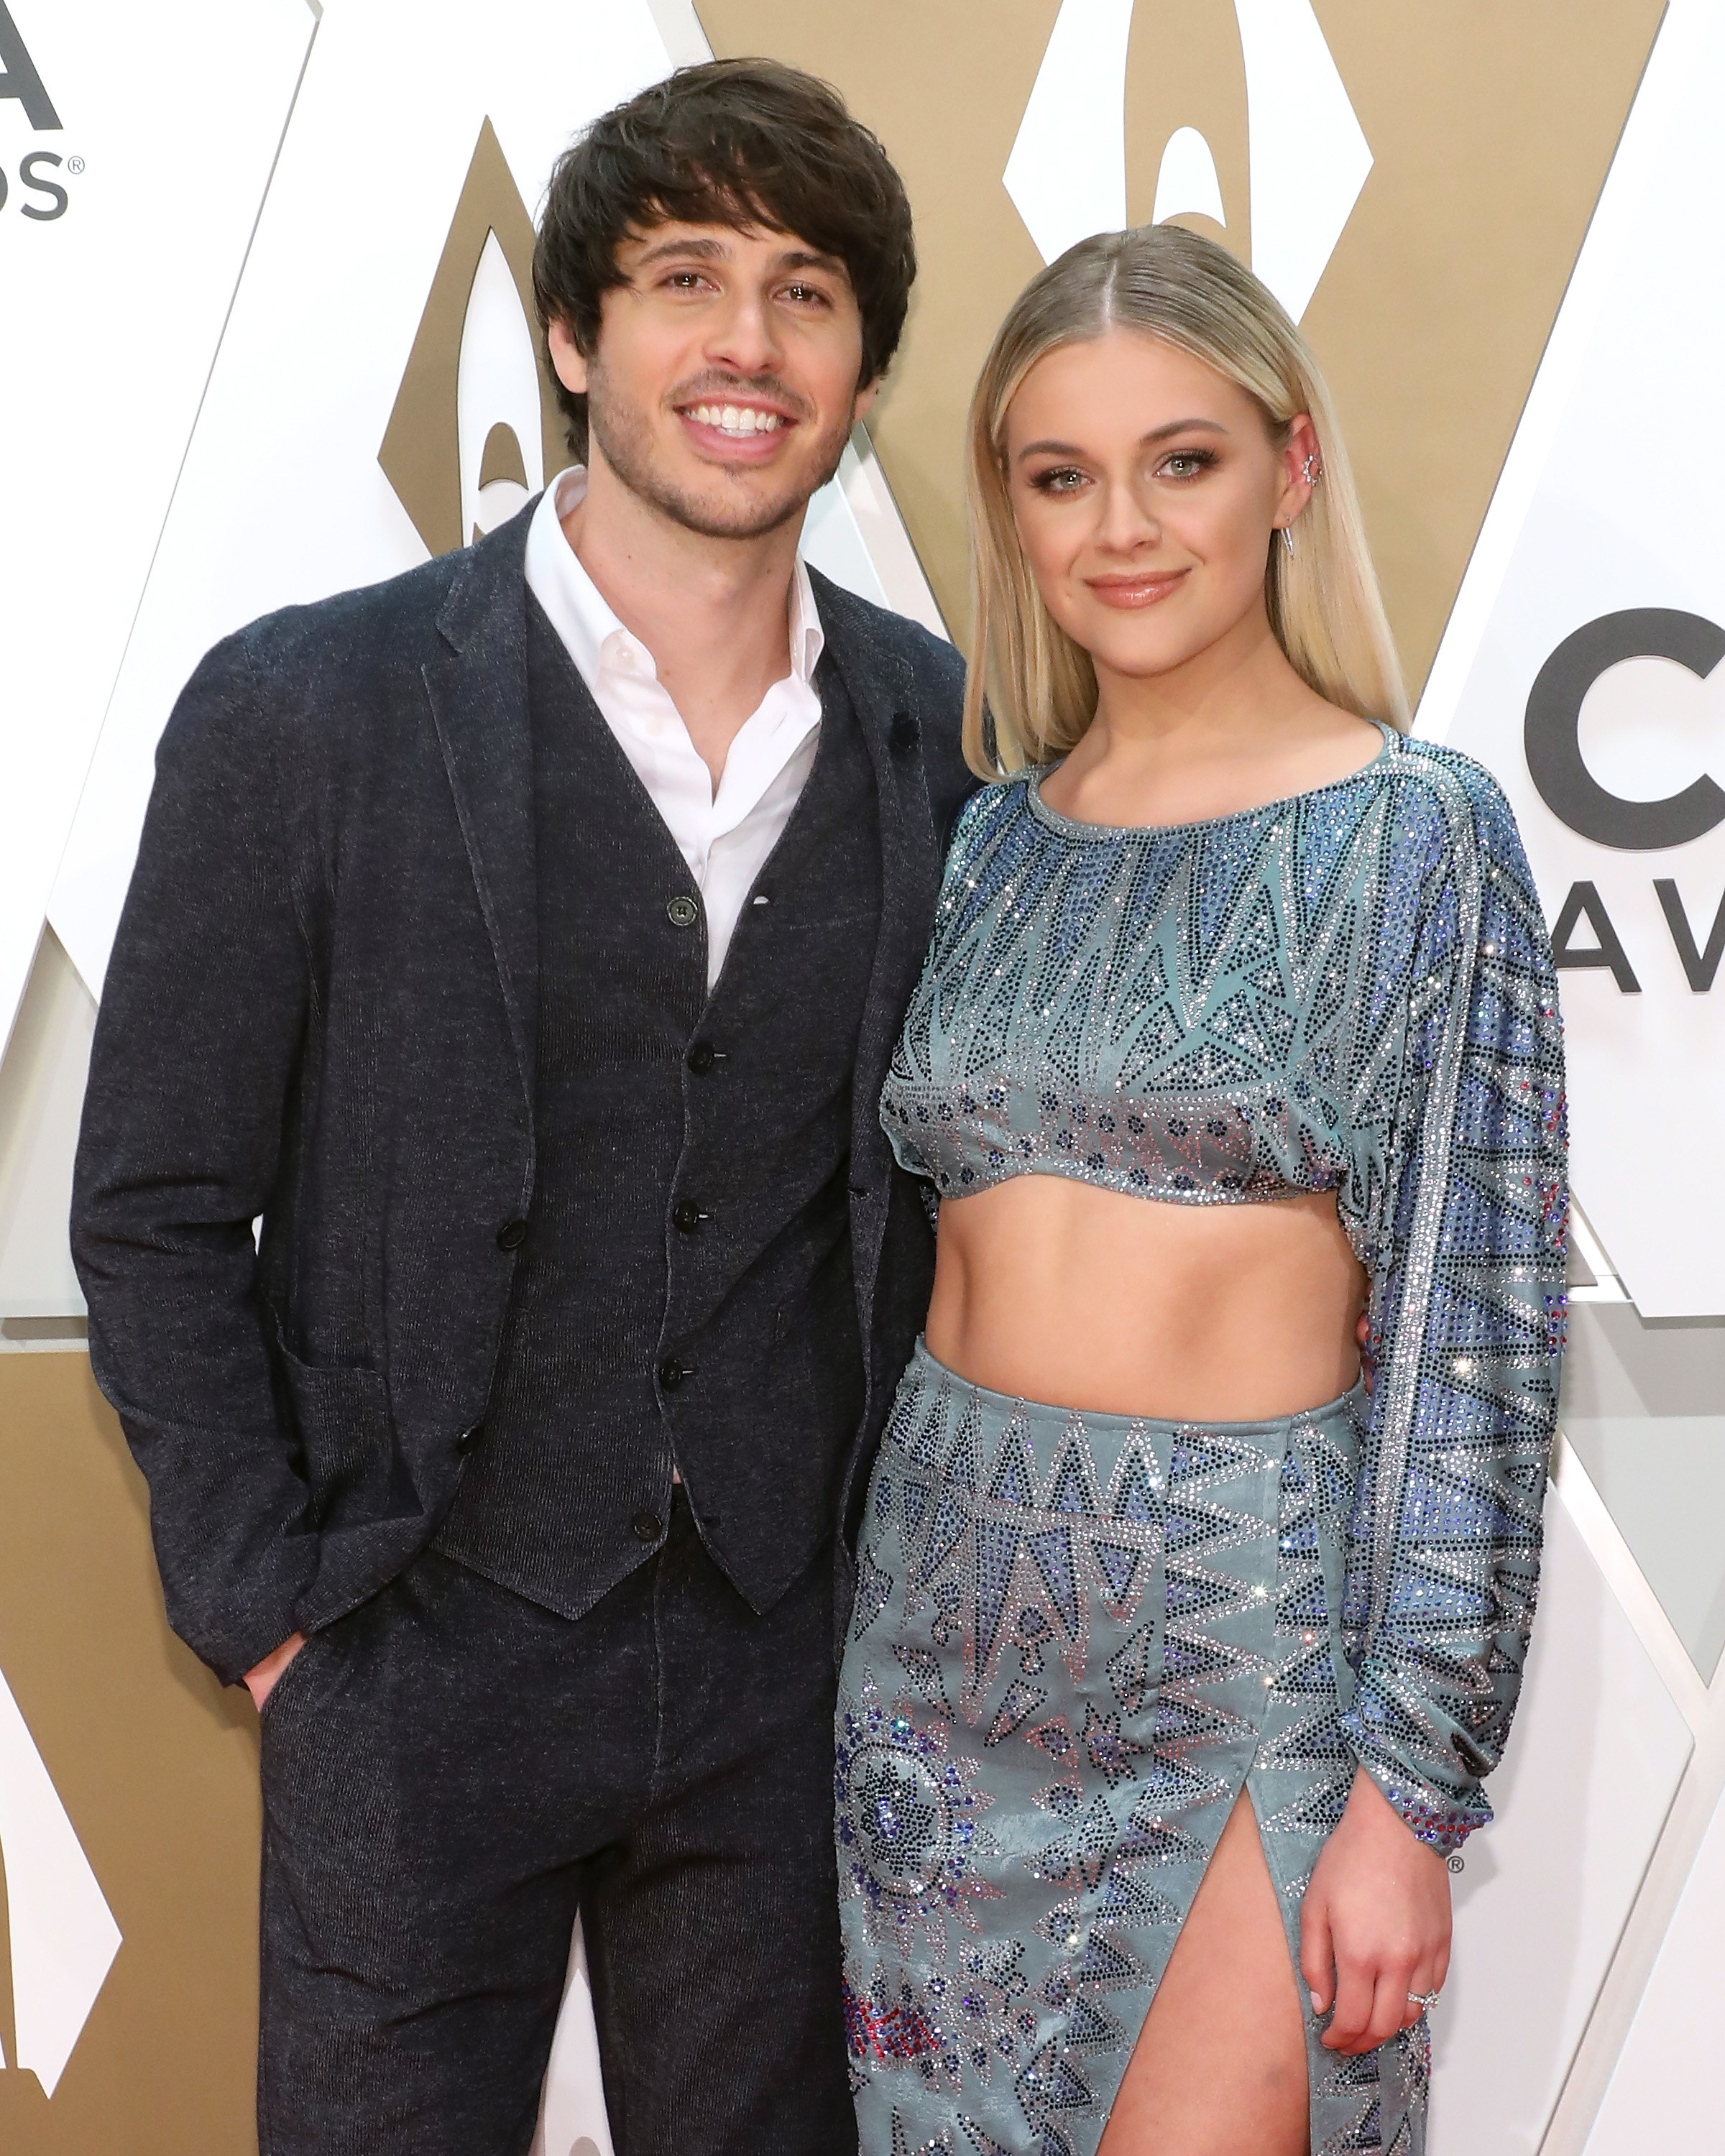 The couple on the red carpet